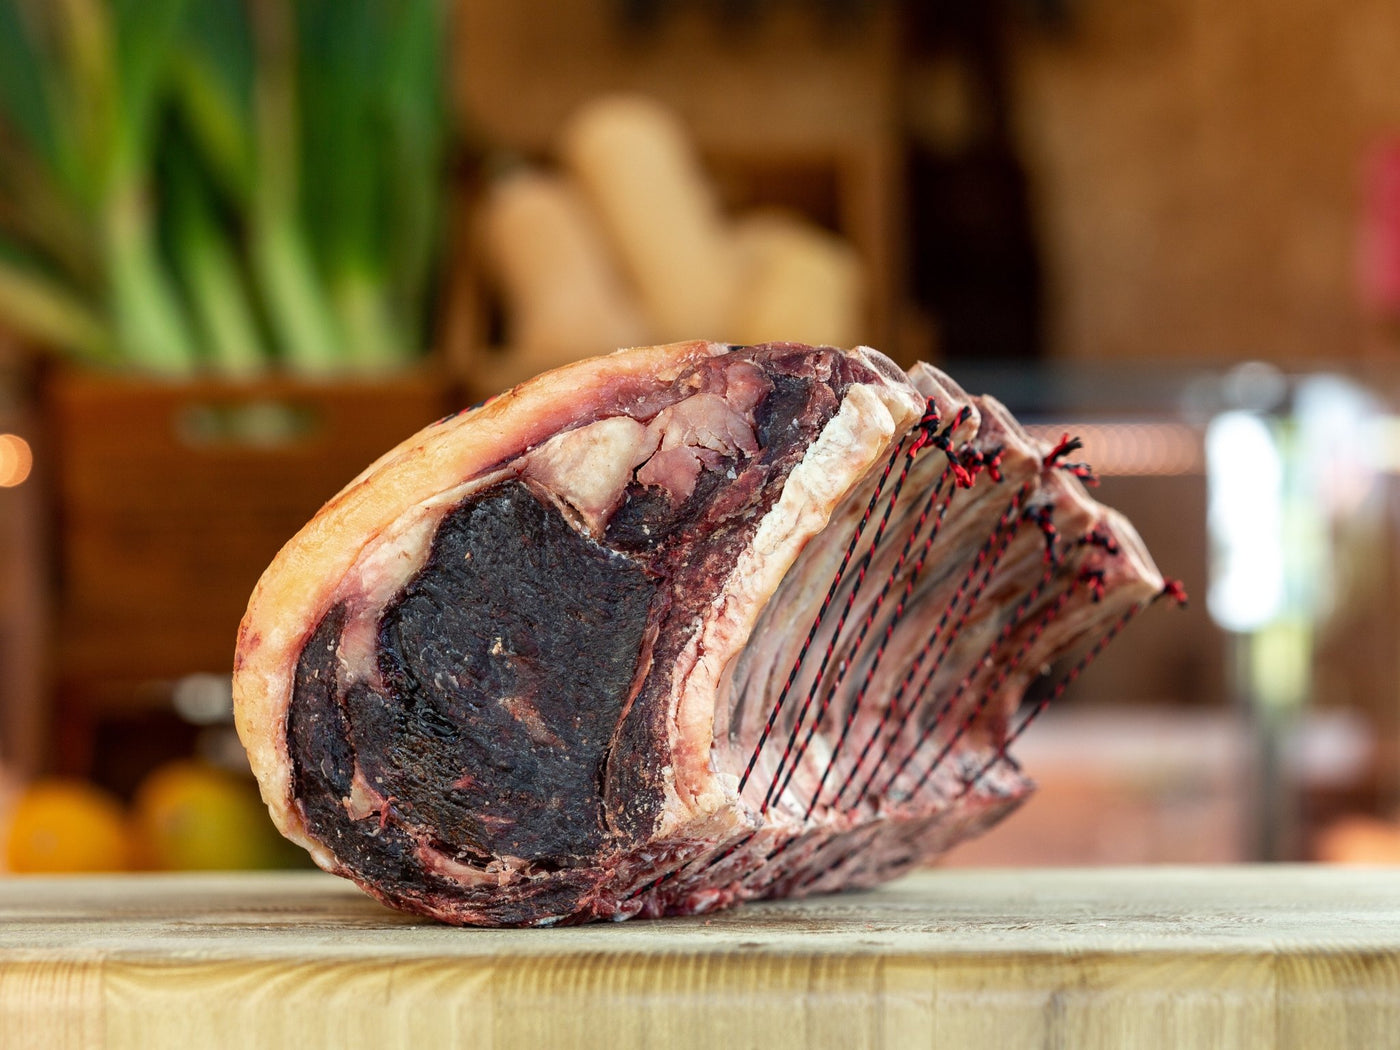 Grass Fed, Dry-Aged Rib Of Beef - Beef - Thomas Joseph Butchery - Ethical Dry-Aged Meat The Best Steak UK Thomas Joseph Butchery